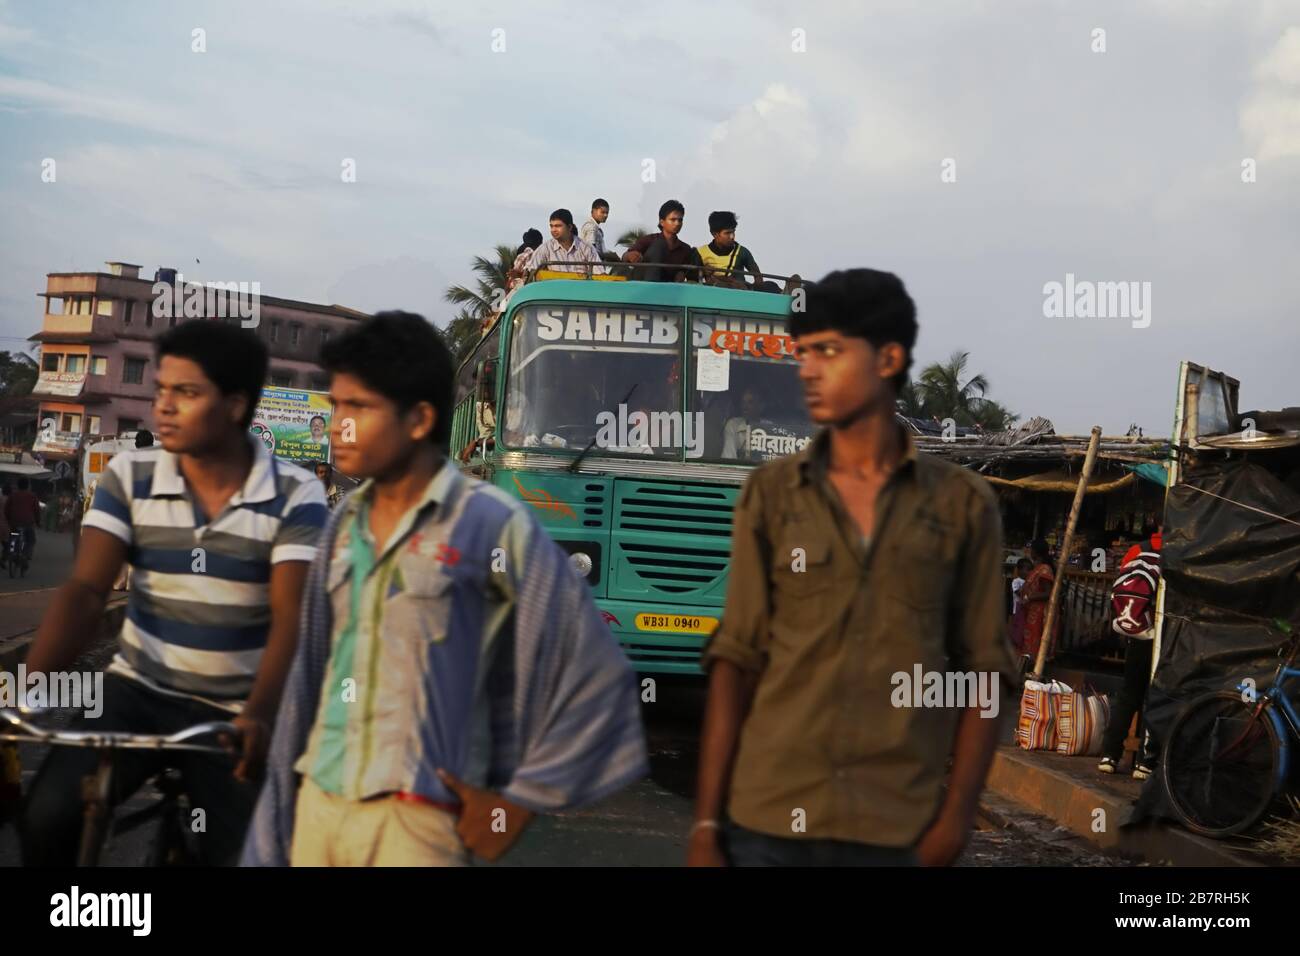 People waiting for a street crossing in a road junction. Kolaghat, Purba Medinipur District, West Bengal, India. © Reynold Sumayku Stock Photo